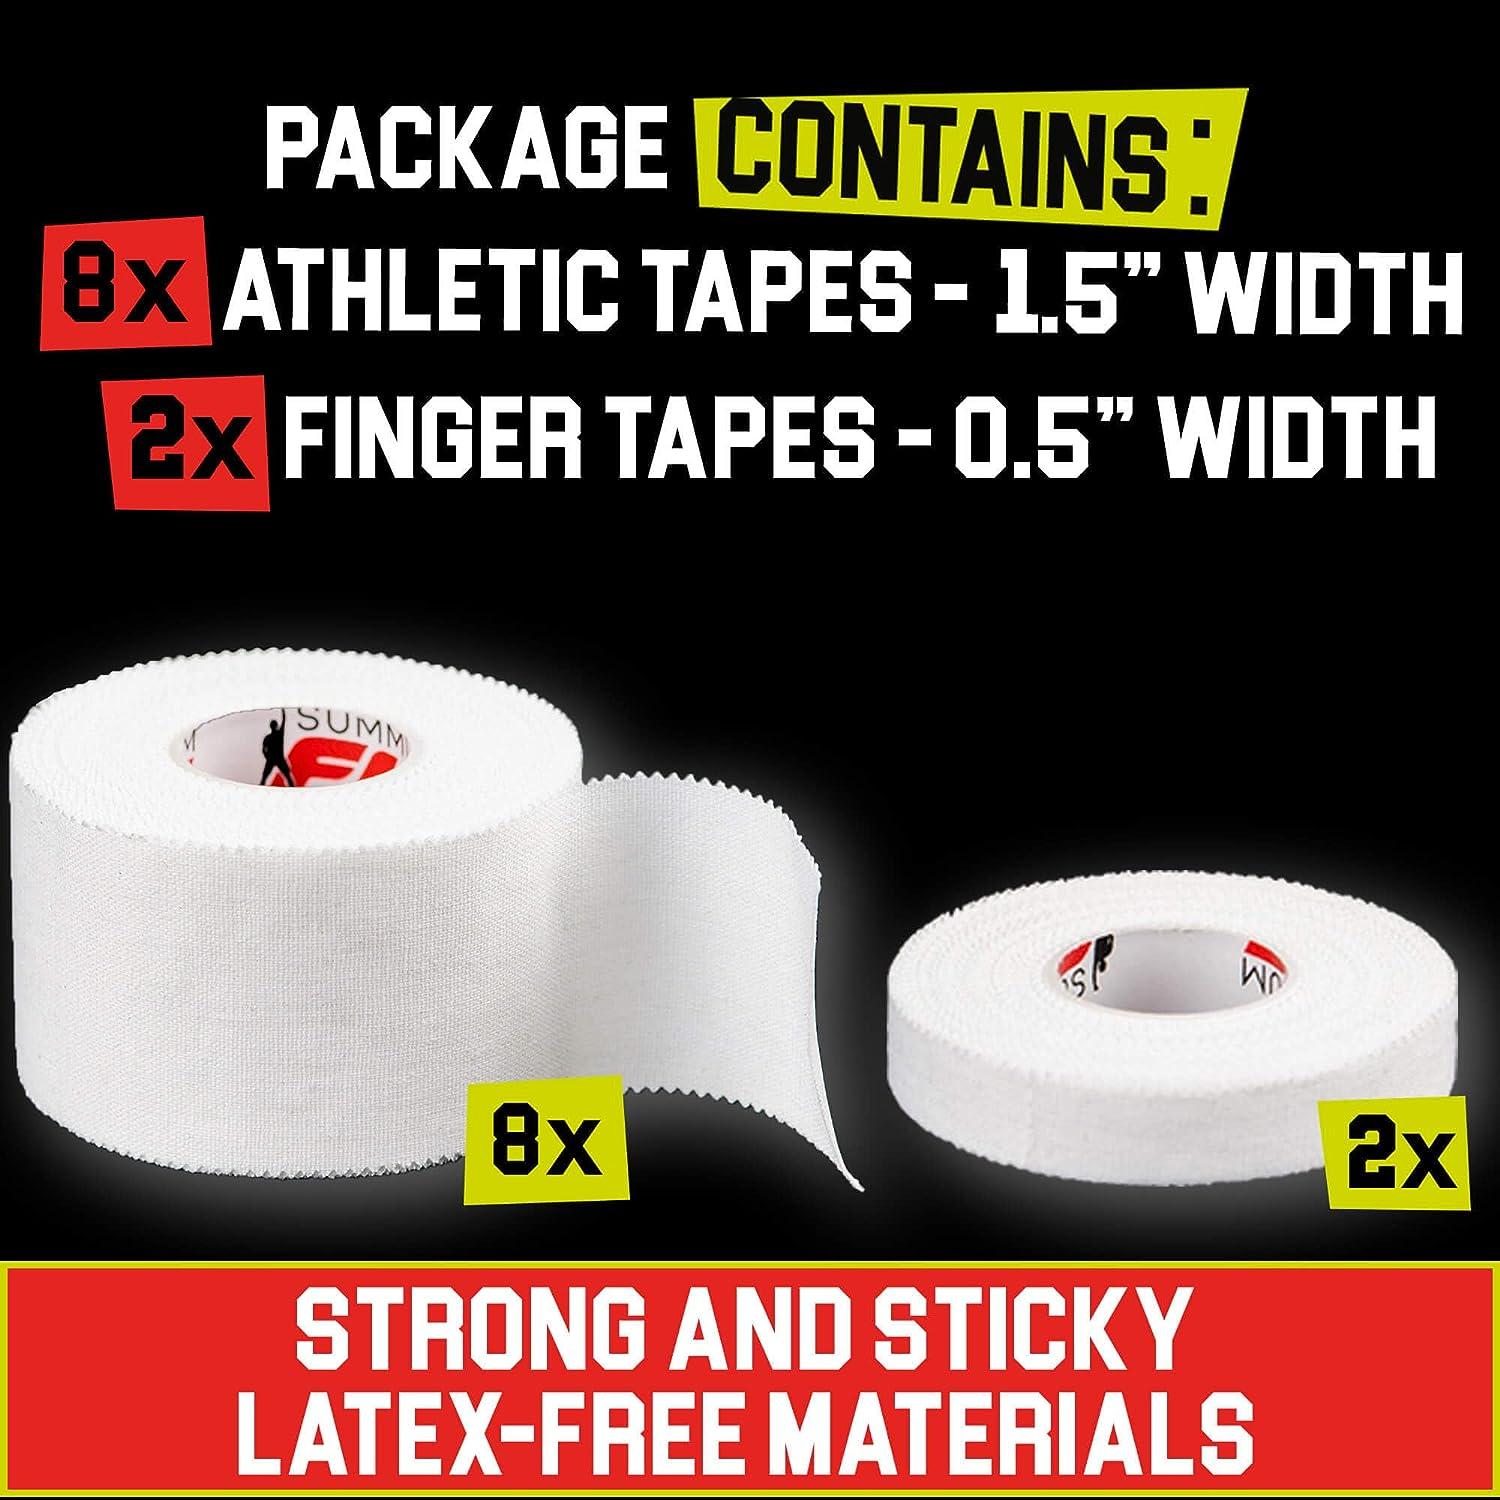 Summum Fit Athletic Tape Extremely Strong: 3 Rolls + 1 Finger Tape